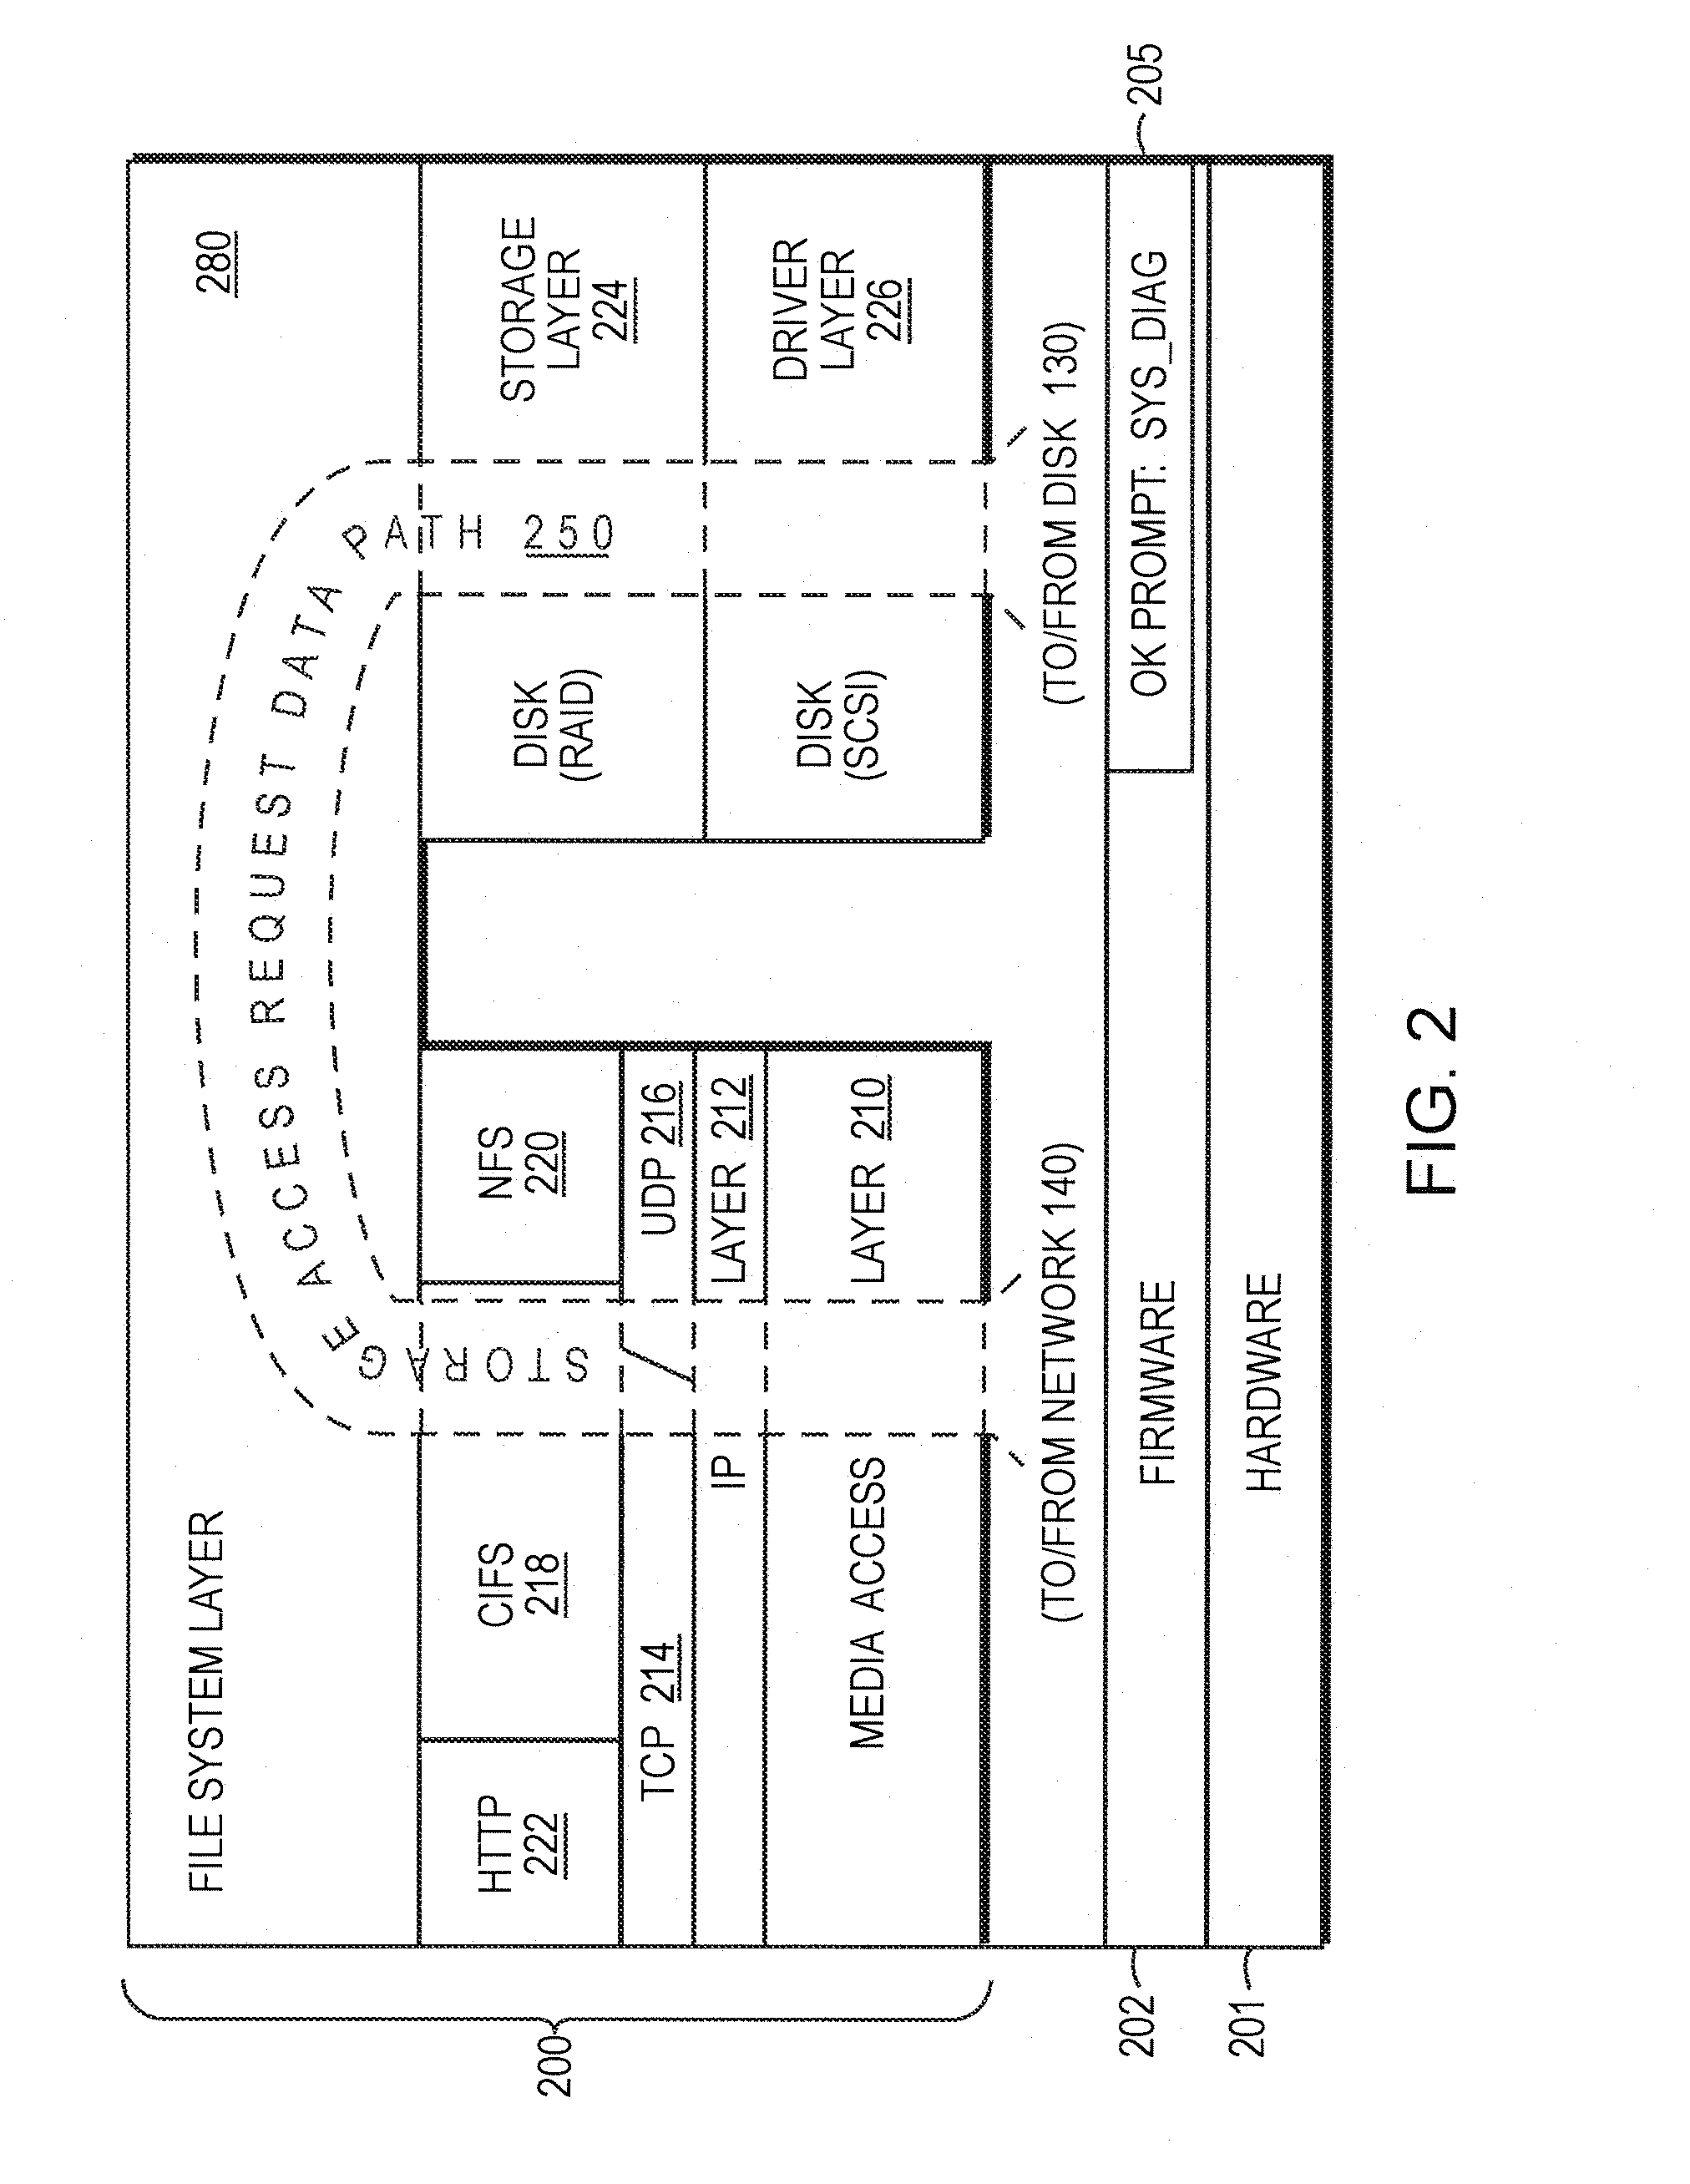 System and method for diagnostics execution and data capture in a storage system using nonvolatile memory